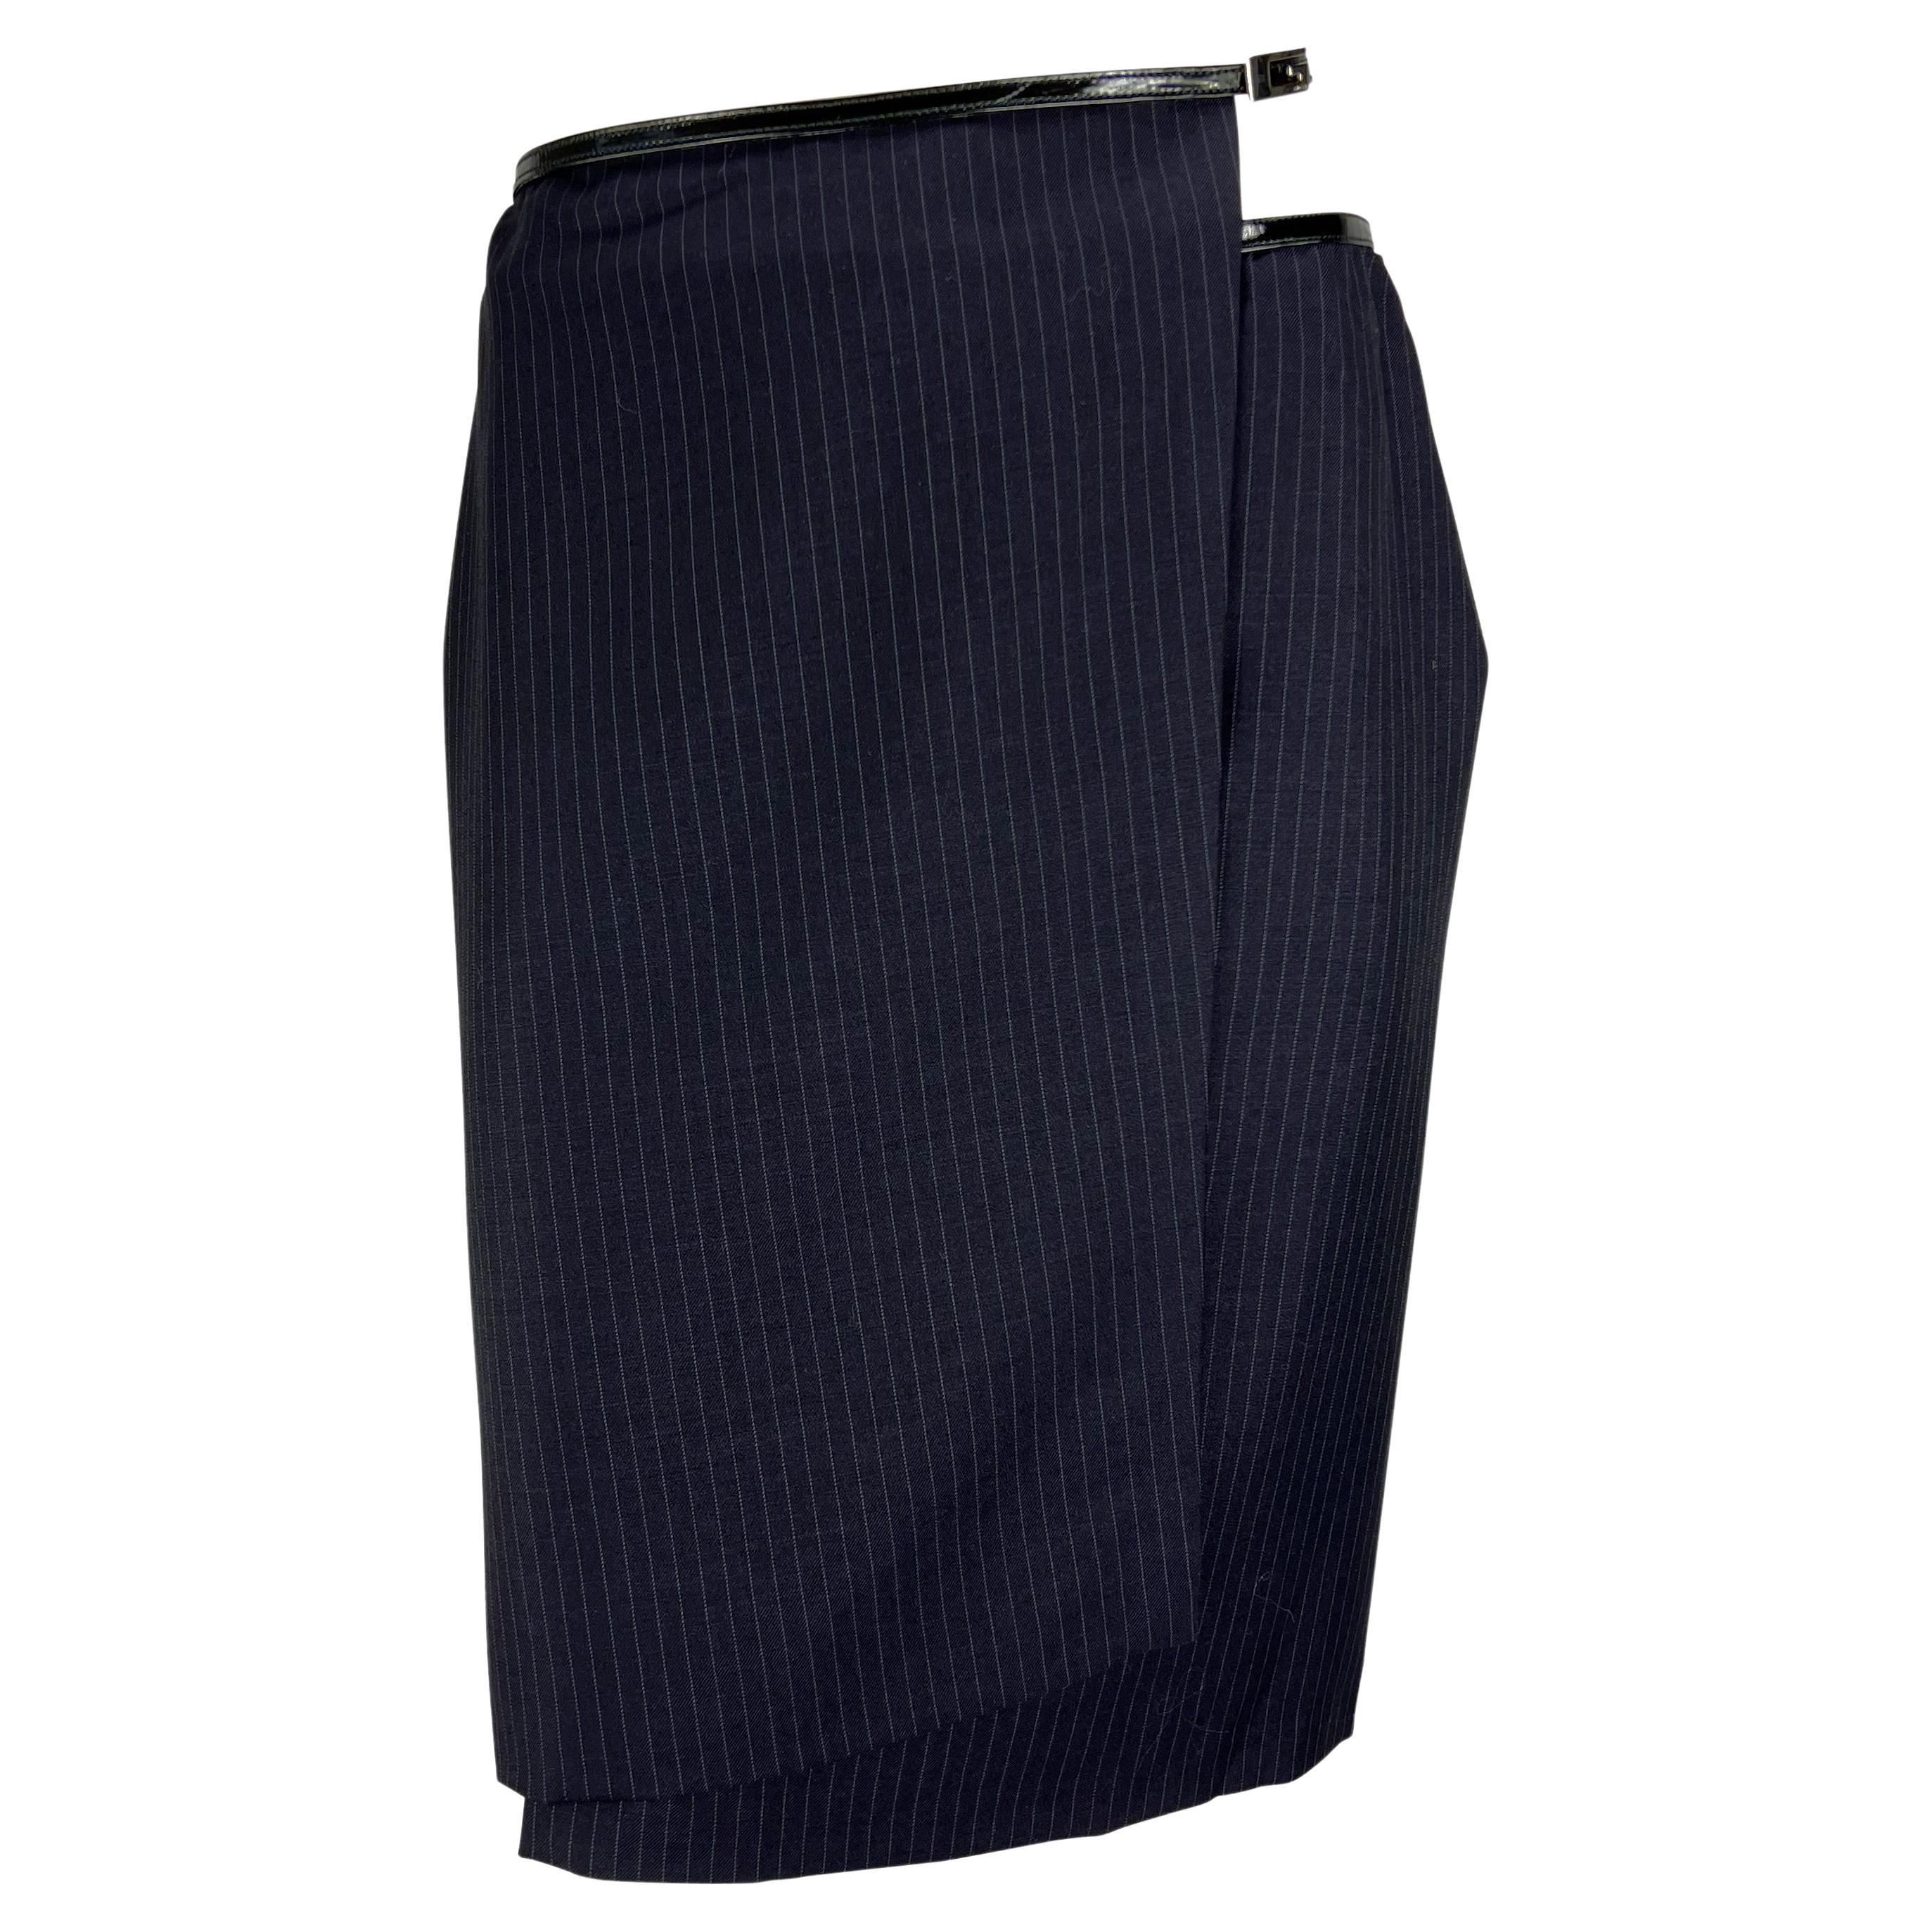 F/W 1997 Gucci by Tom Ford Runway Patent G Buckle Navy Pinstripe Wrap Skirt 4